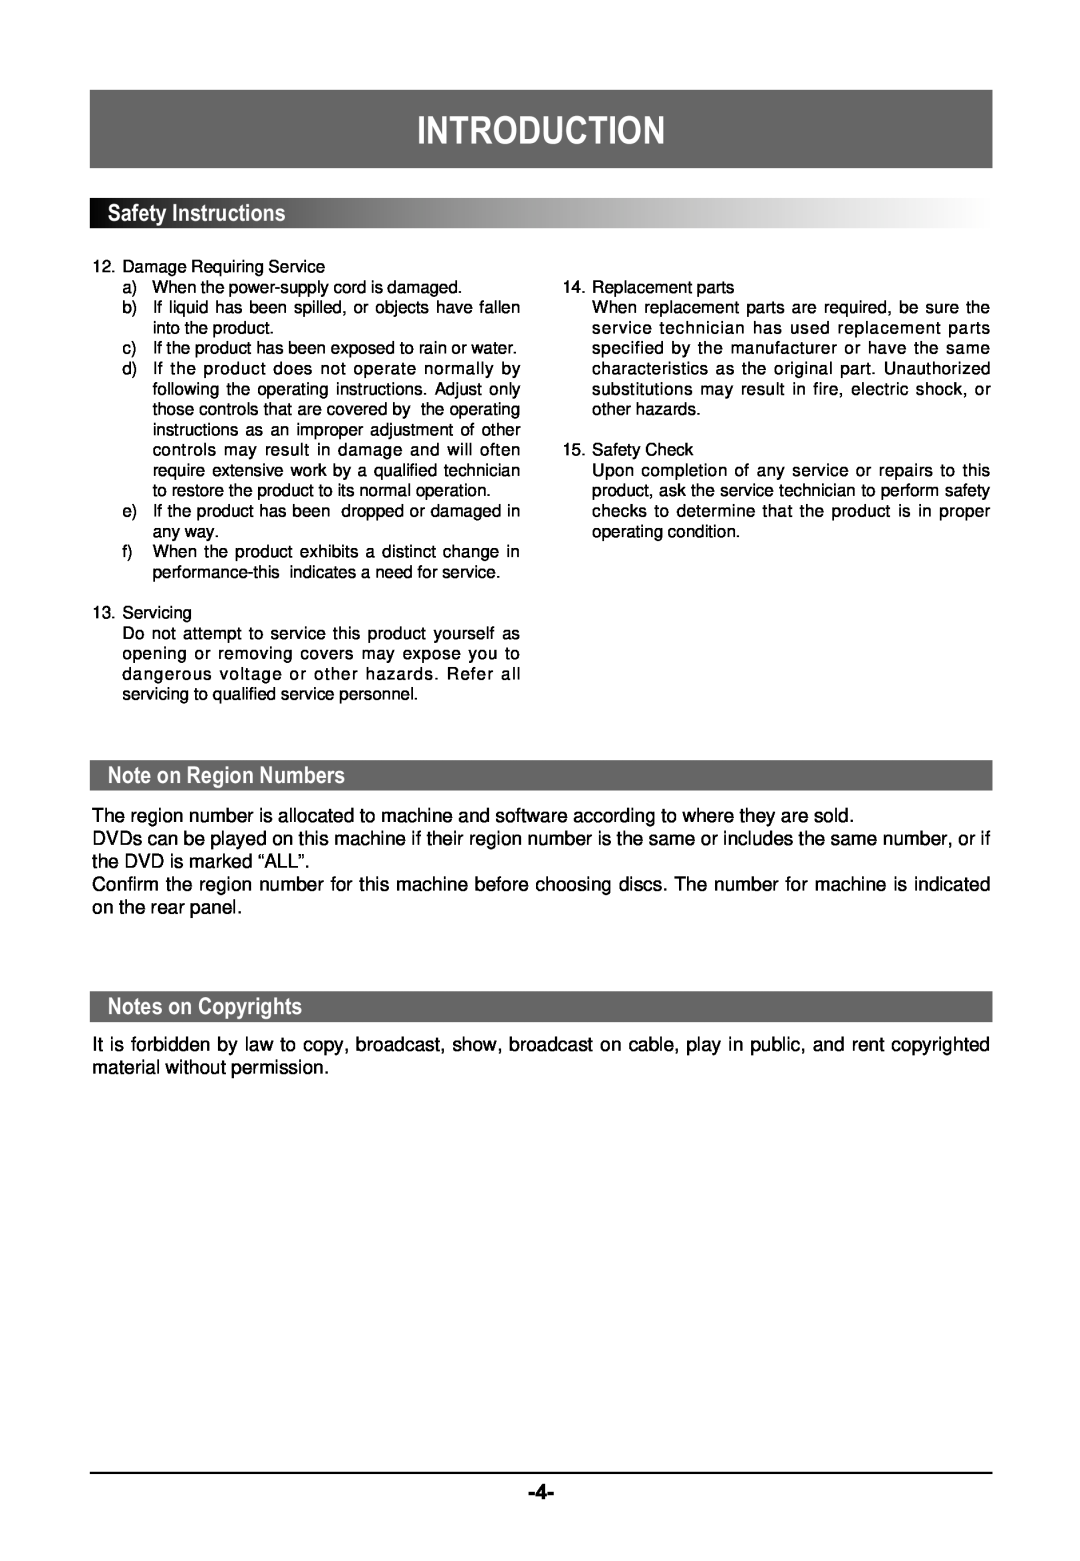 Farenheit Technologies DVD-19 owner manual SafetyInstructions, Note on Region Numbers, Notes on Copyrights, Introduction 